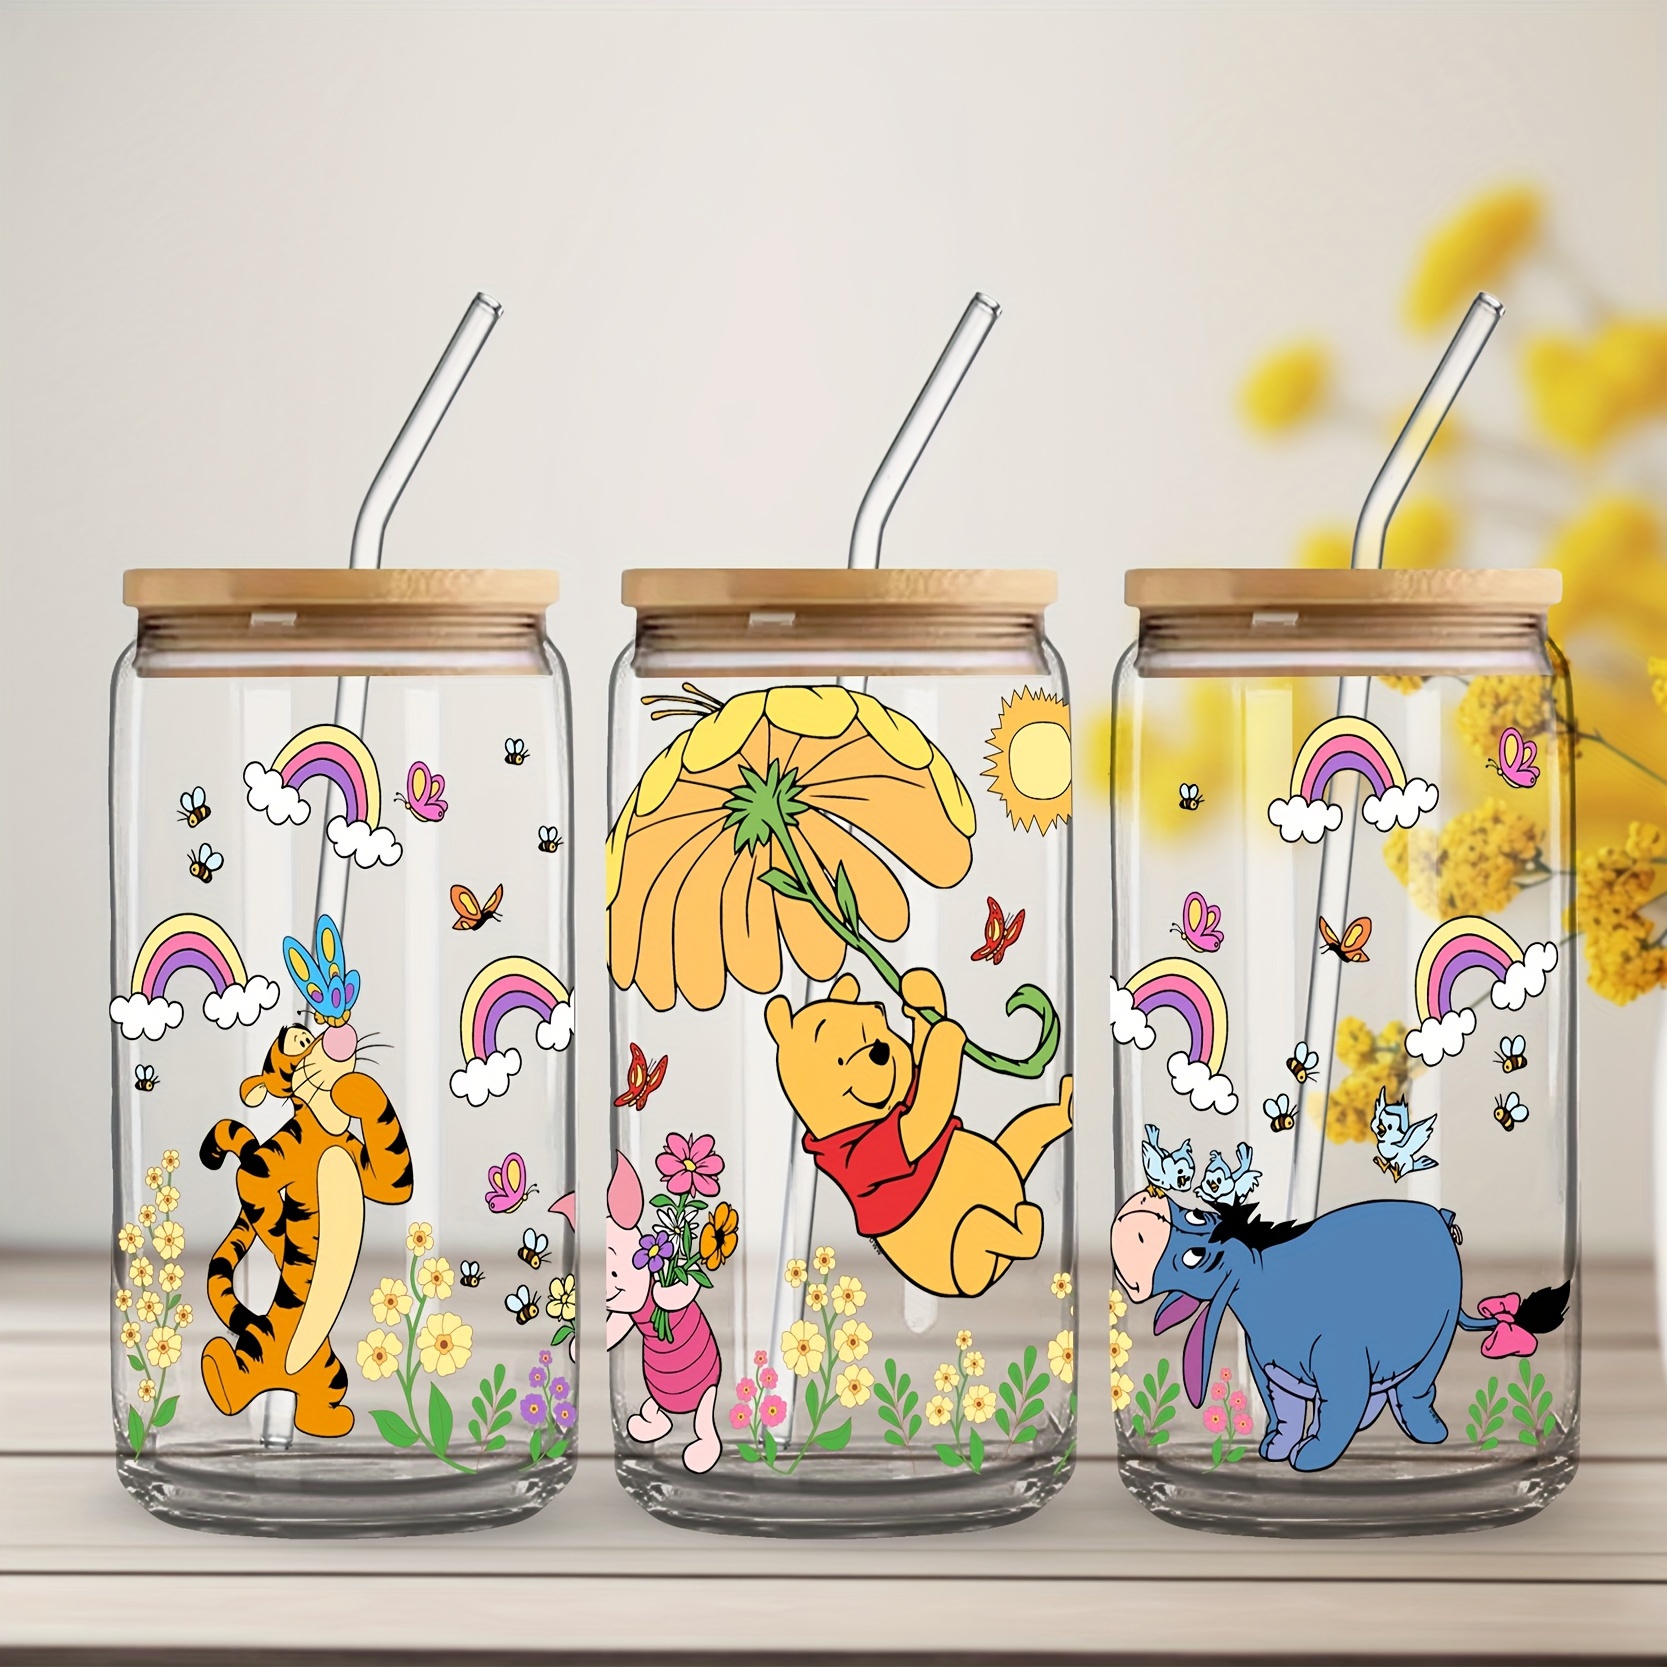 

Disney Winnie & Piglet 16oz Glass Tumbler With Straw - Insulated, Reusable Drinking Cup For Coffee, , Milk, Juice - Handwash Only